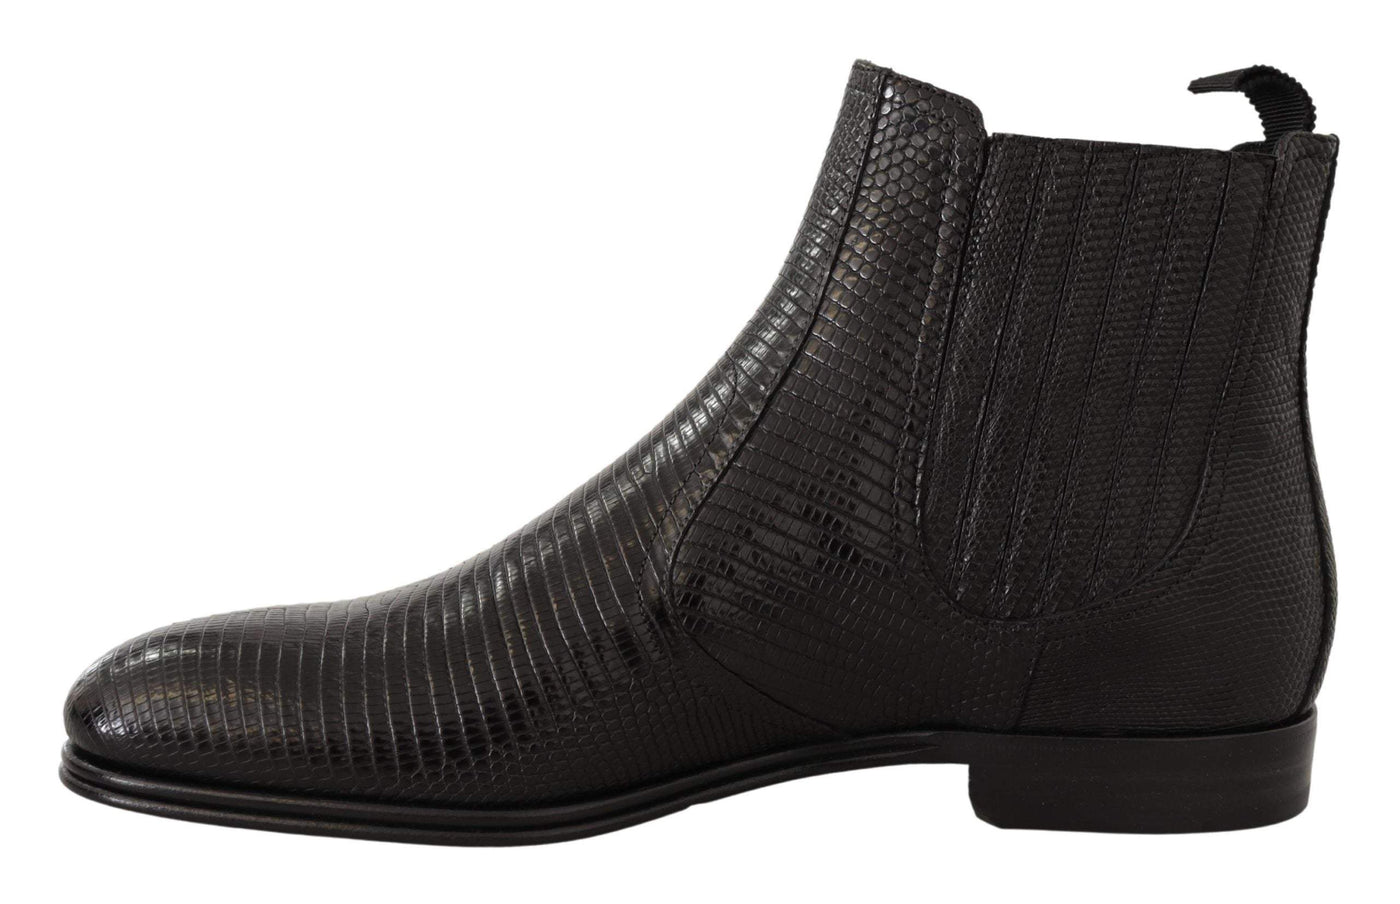 Dolce & Gabbana Black Leather Lizard Skin Ankle Boots #men, Black, Boots - Men - Shoes, Dolce & Gabbana, EU40/US7, feed-agegroup-adult, feed-color-Black, feed-gender-male at SEYMAYKA